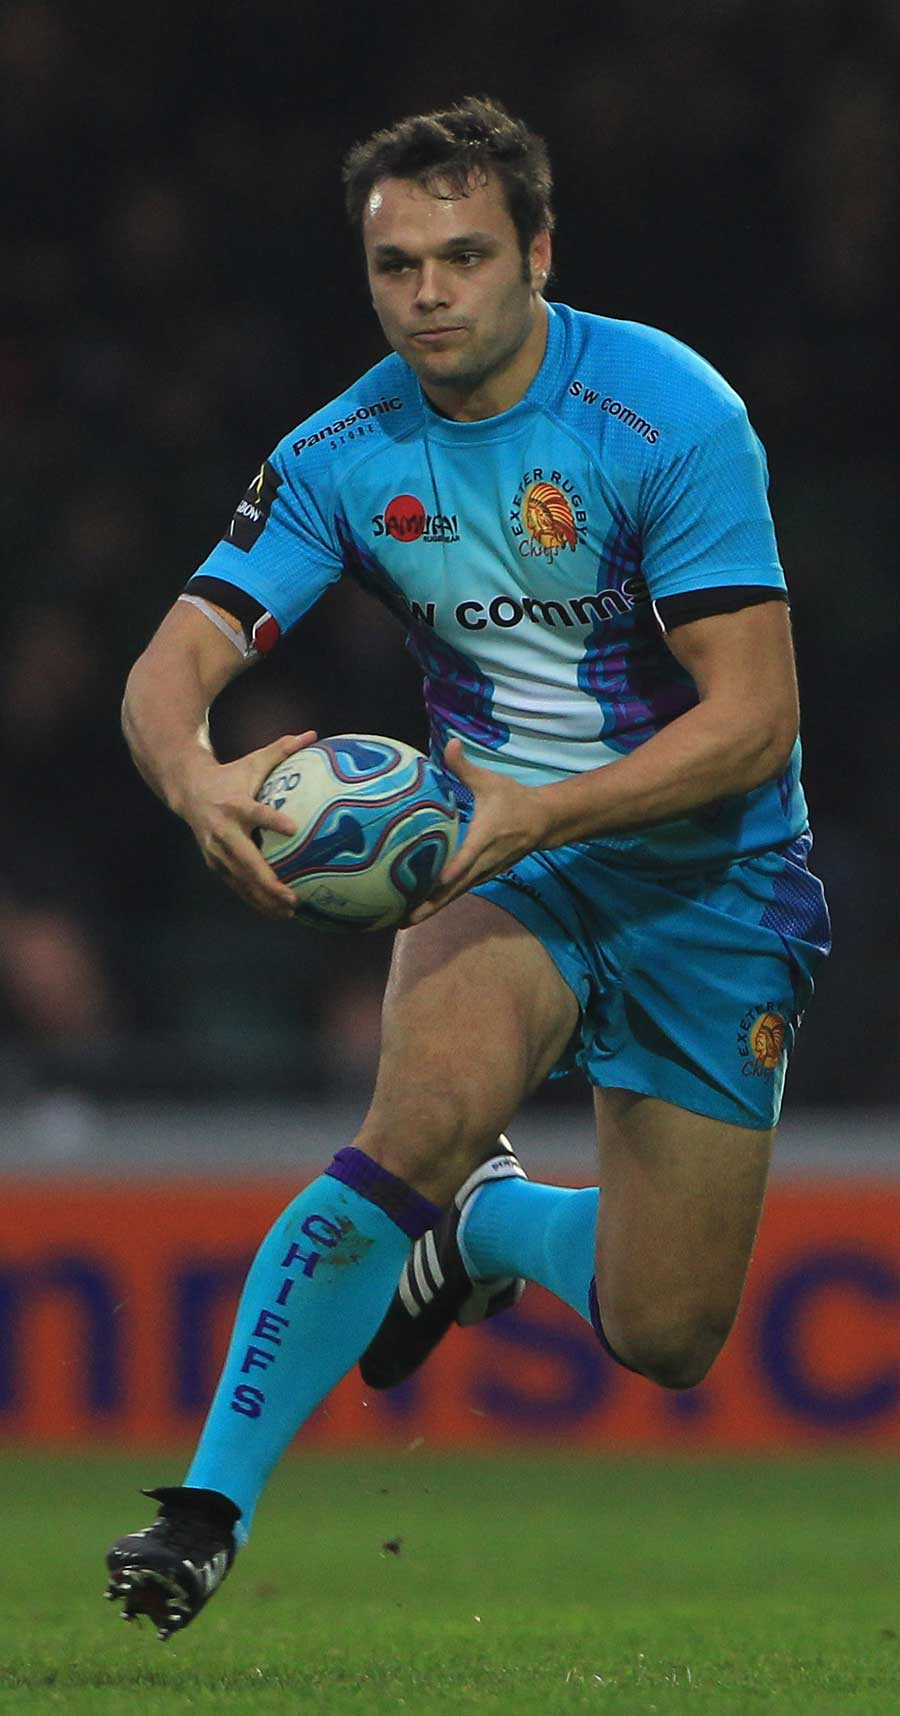 Exeter Chiefs' Phil Dollman on the charge against Cavalieri Prato